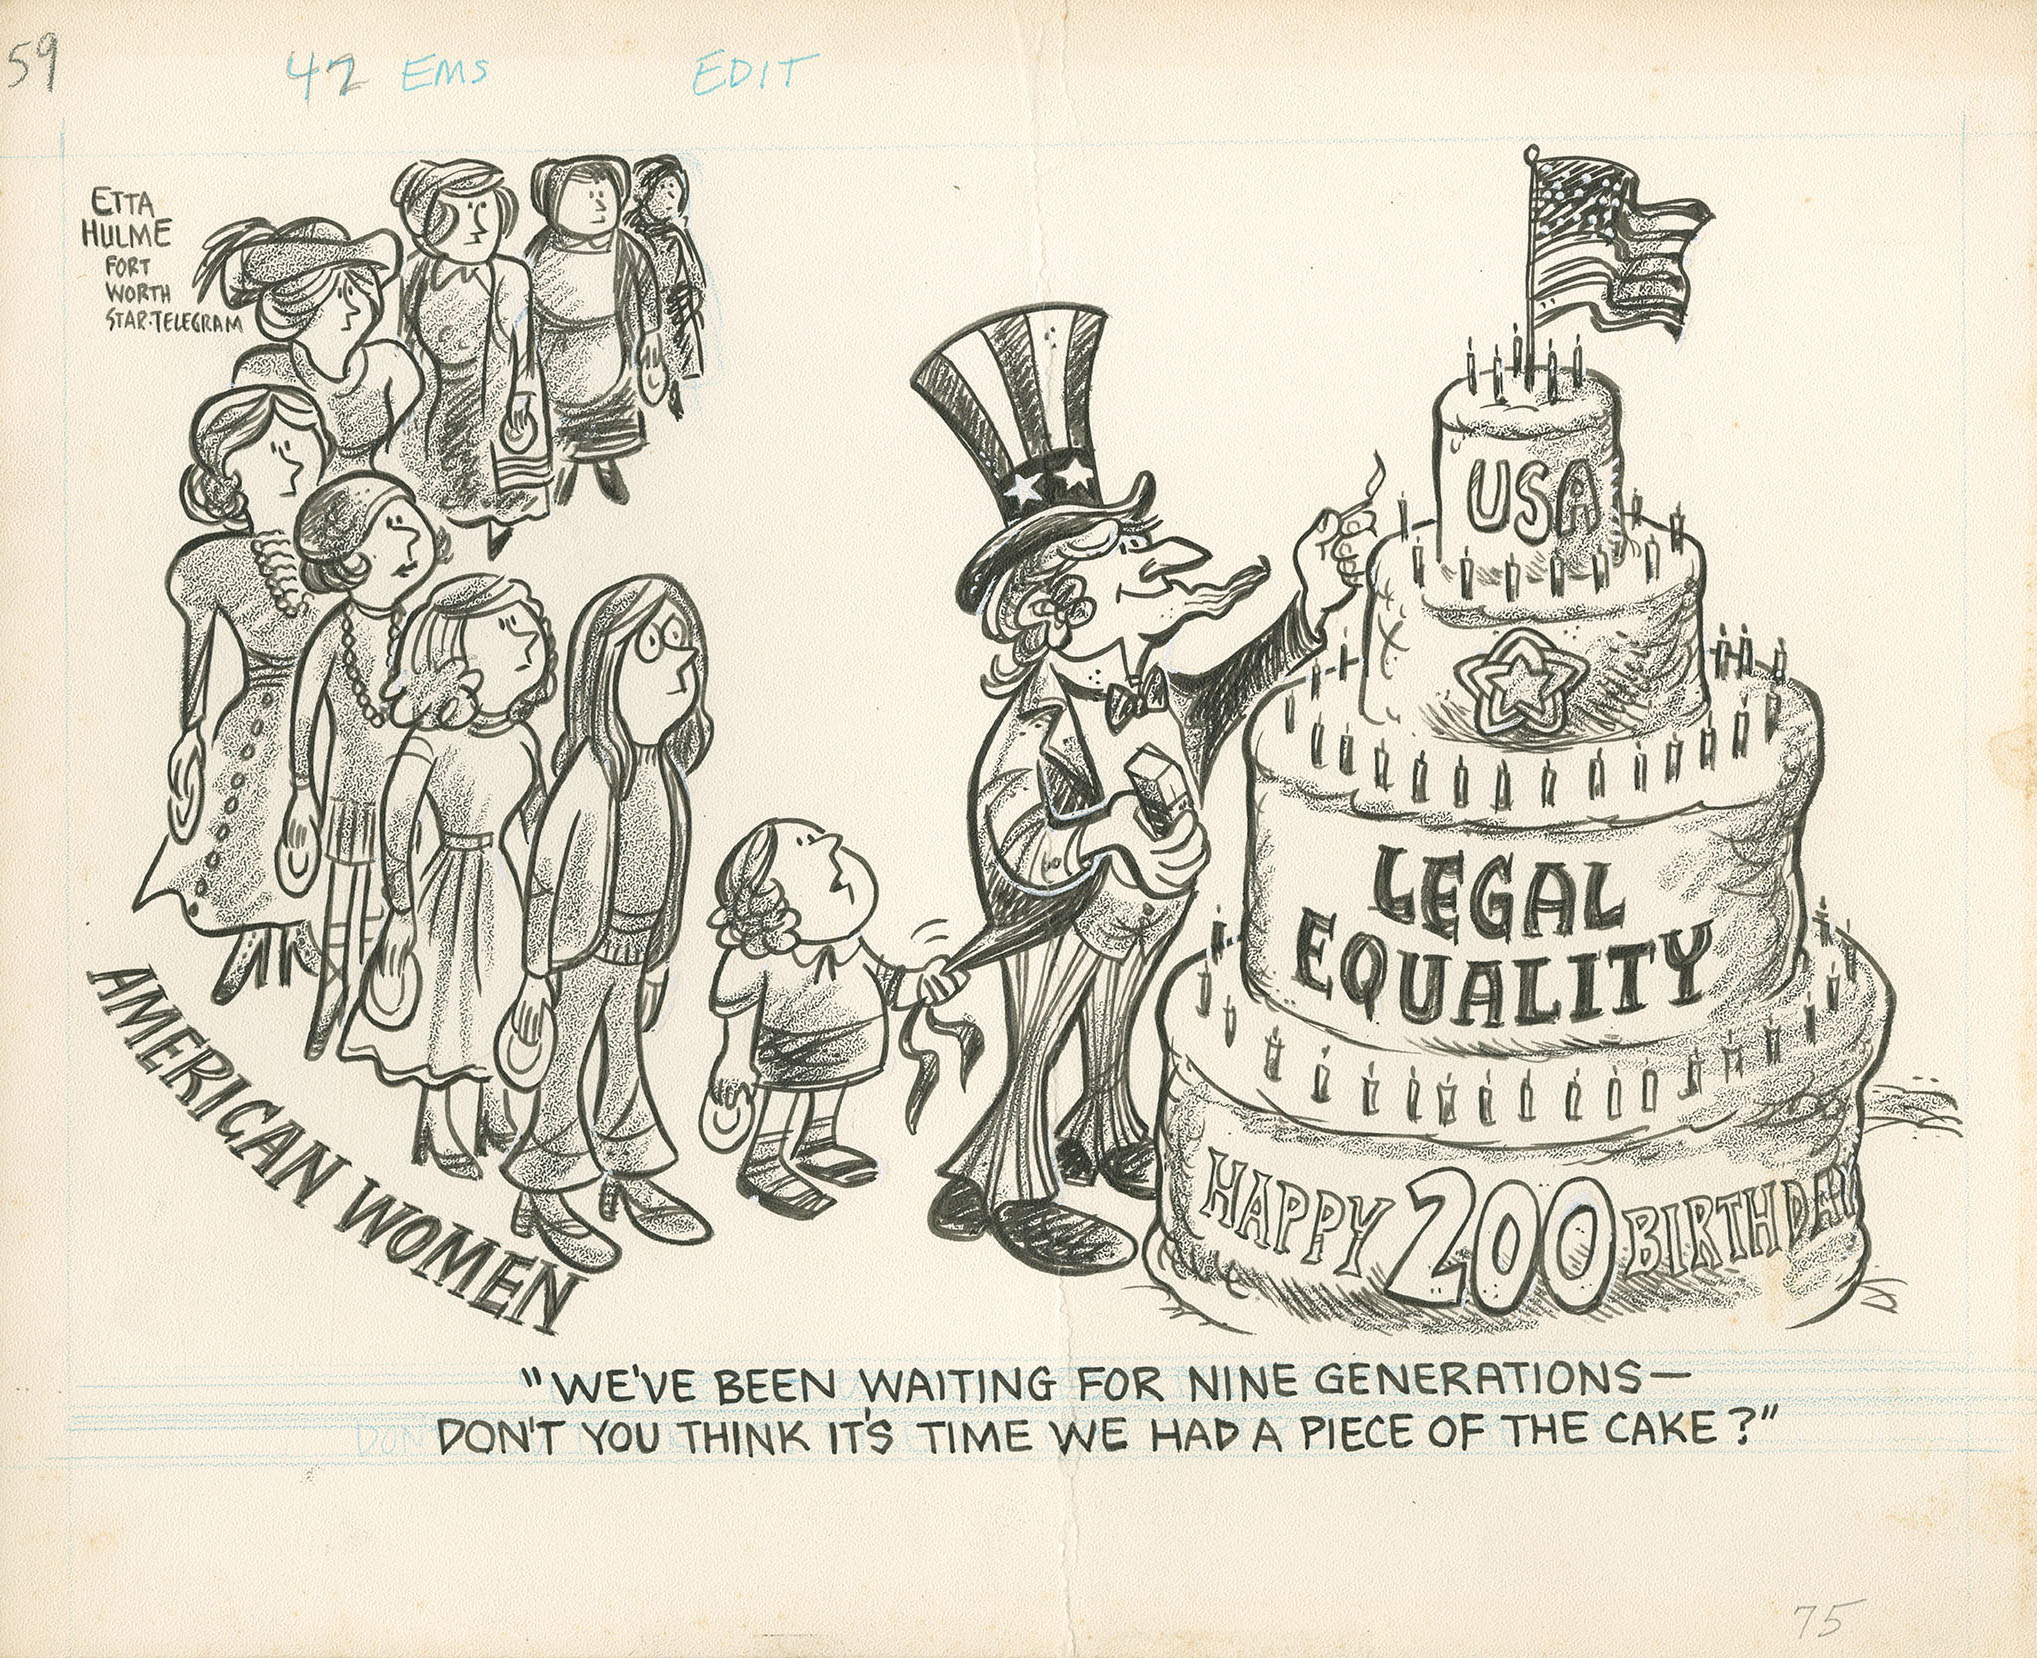 Editorial cartoon by Etta Hulme (1975) depicting American women lining up for a cake labeled “Legal Equality” from Uncle Sam. The caption reads “We’ve been waiting for nine generations—don’t you think it’s time we had a piece of the cake?”